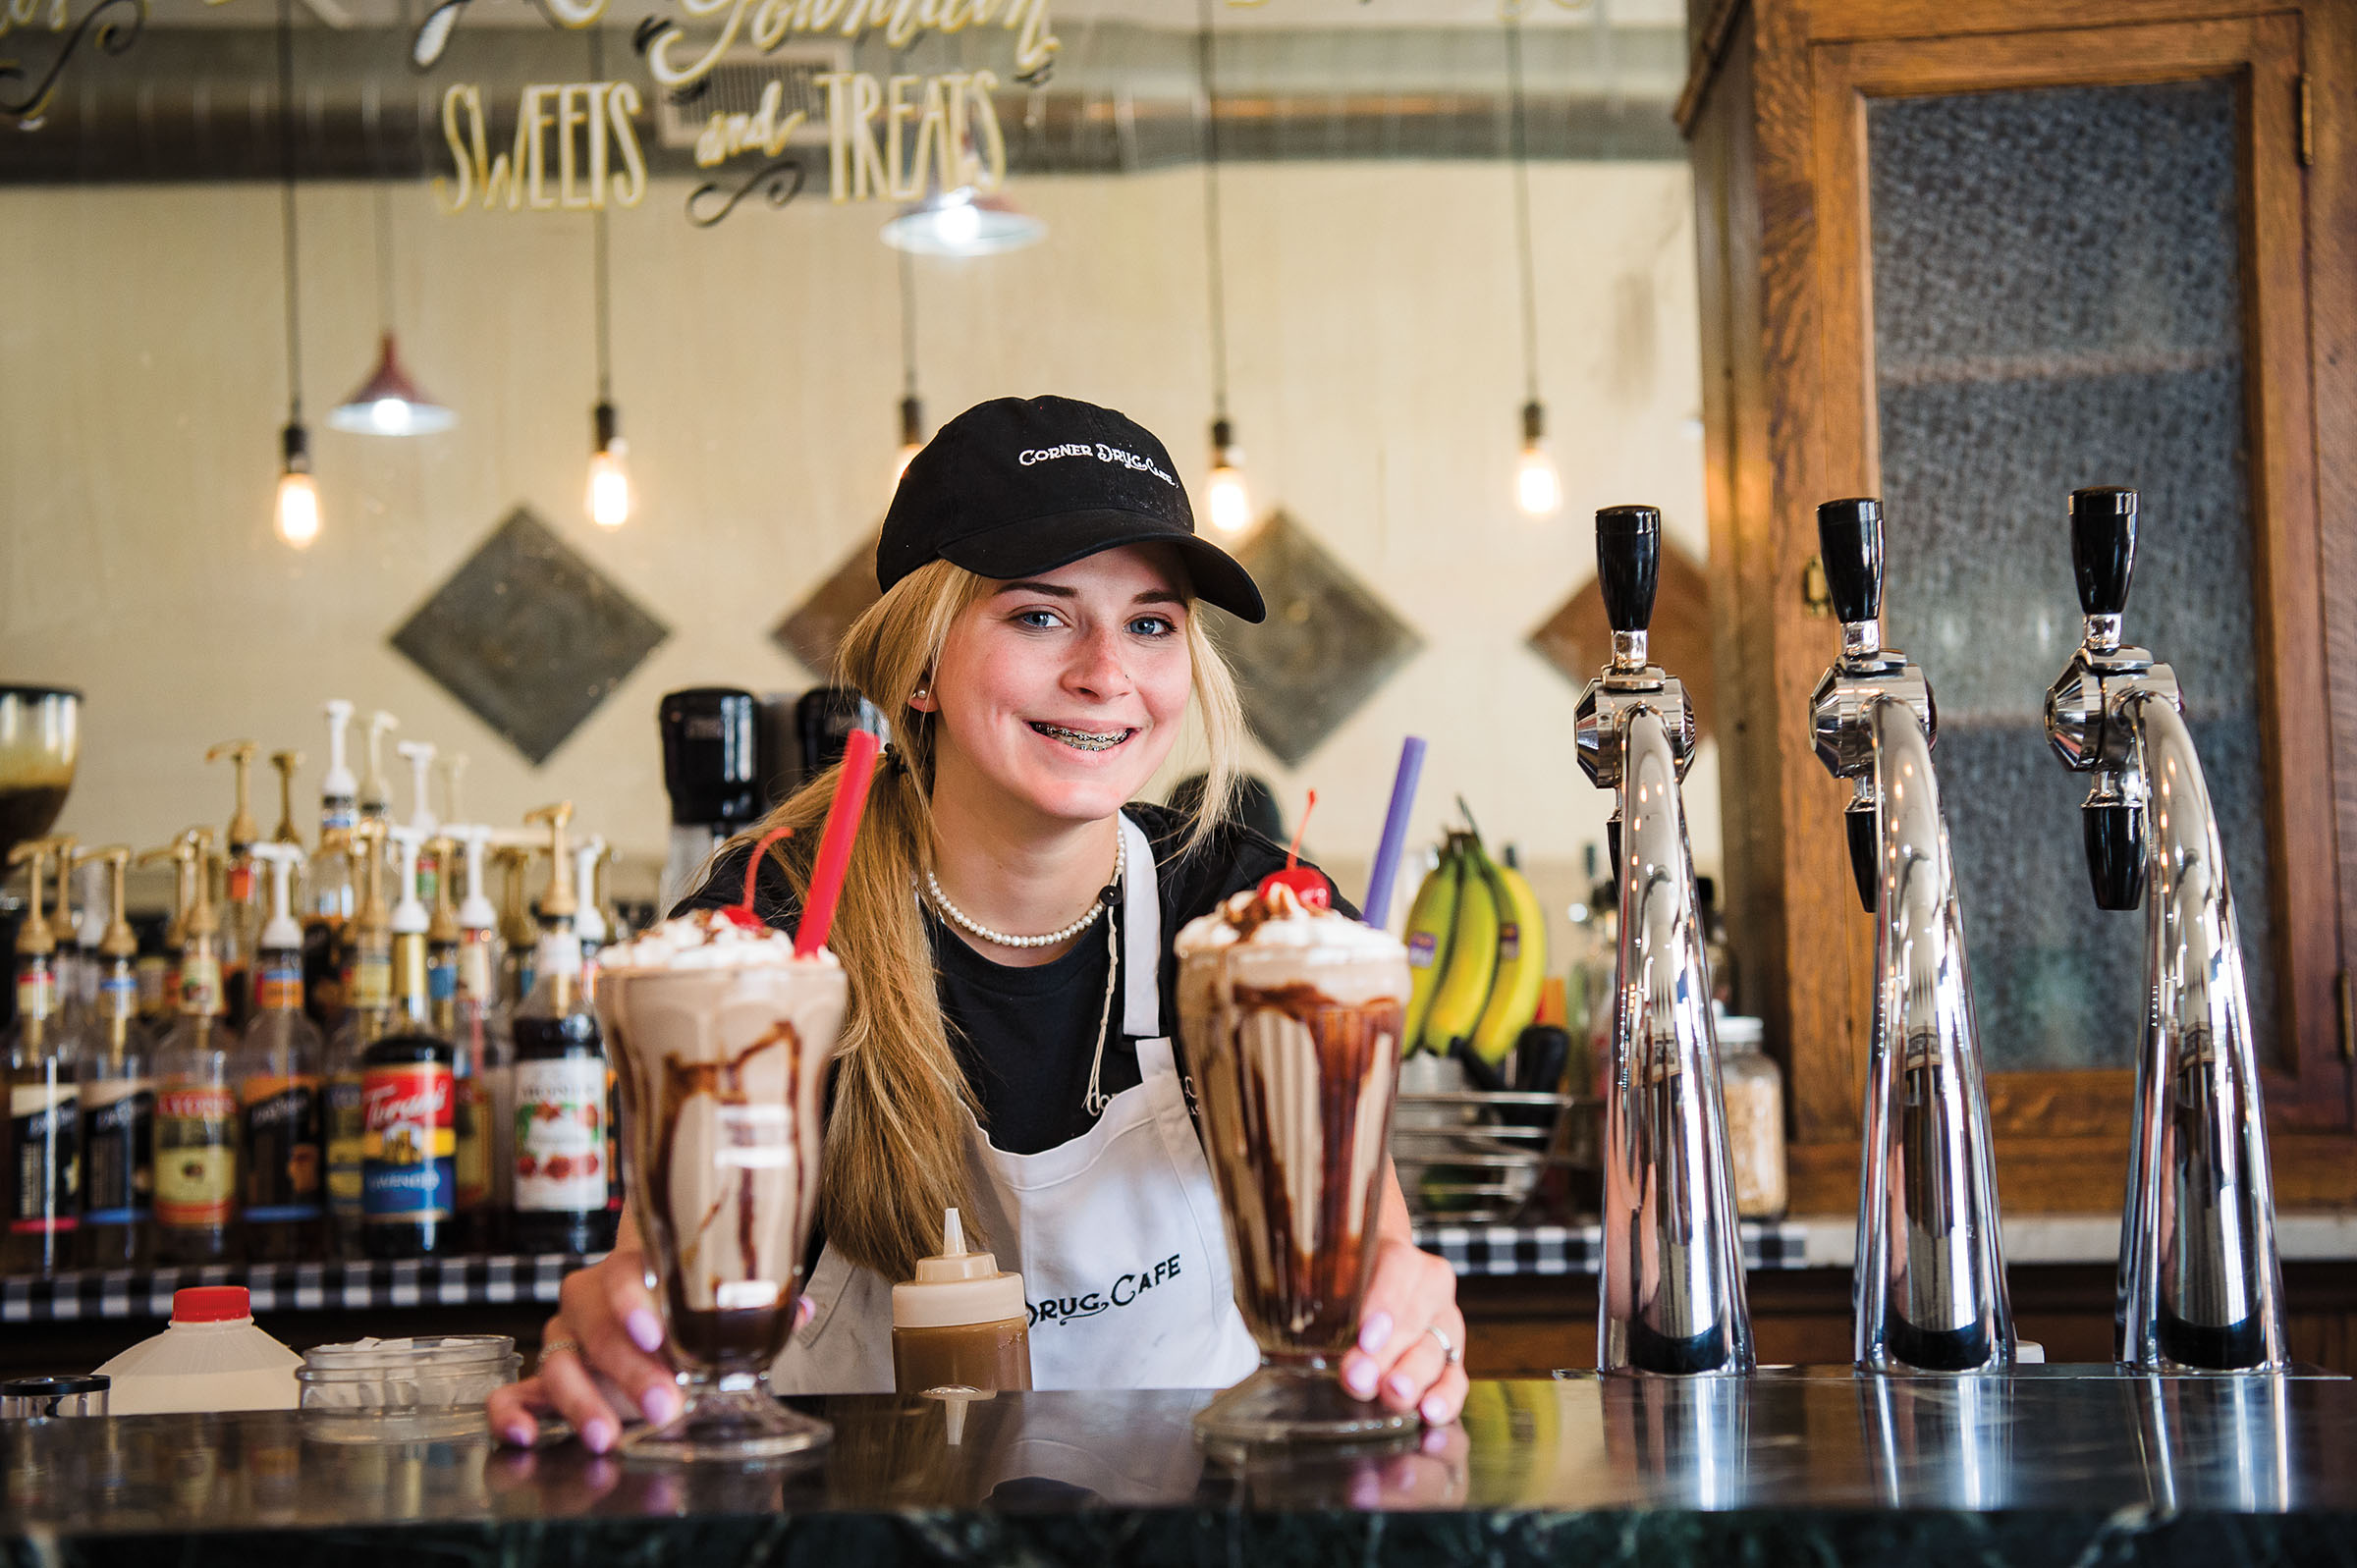 A young woman in a black baseball cap stands behind two milkshakes at a soda fountain